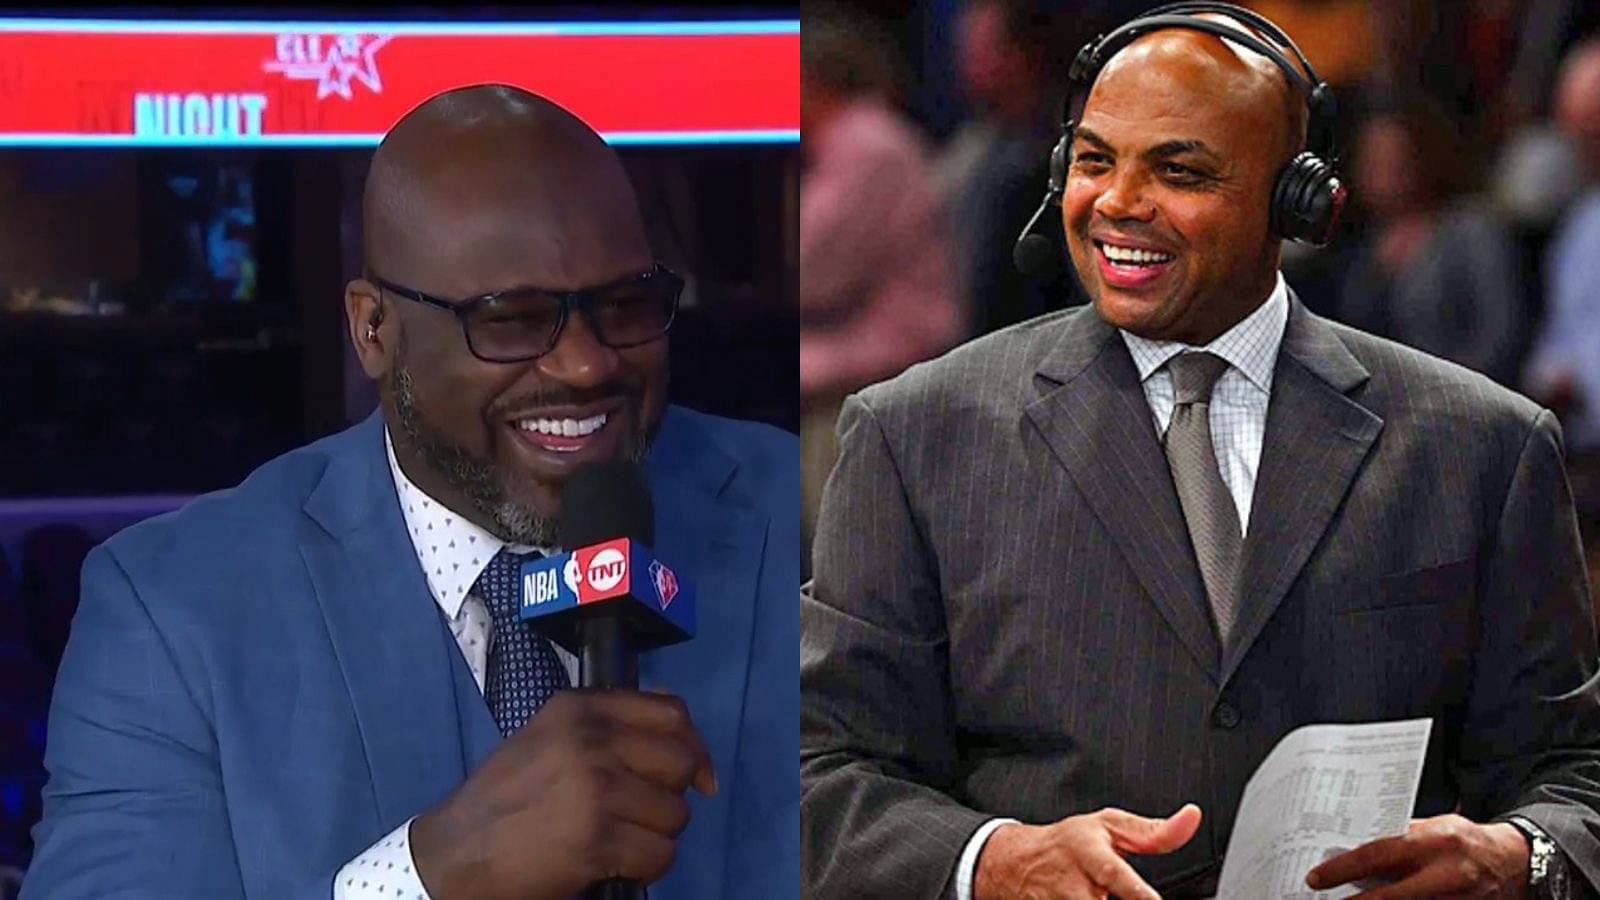 “We are best friends Charles Barkley whether you like it or not”: Millionaire Shaquille O’Neal shockingly brought a gift hamper for Chuck, one of which said ‘best basketball player'